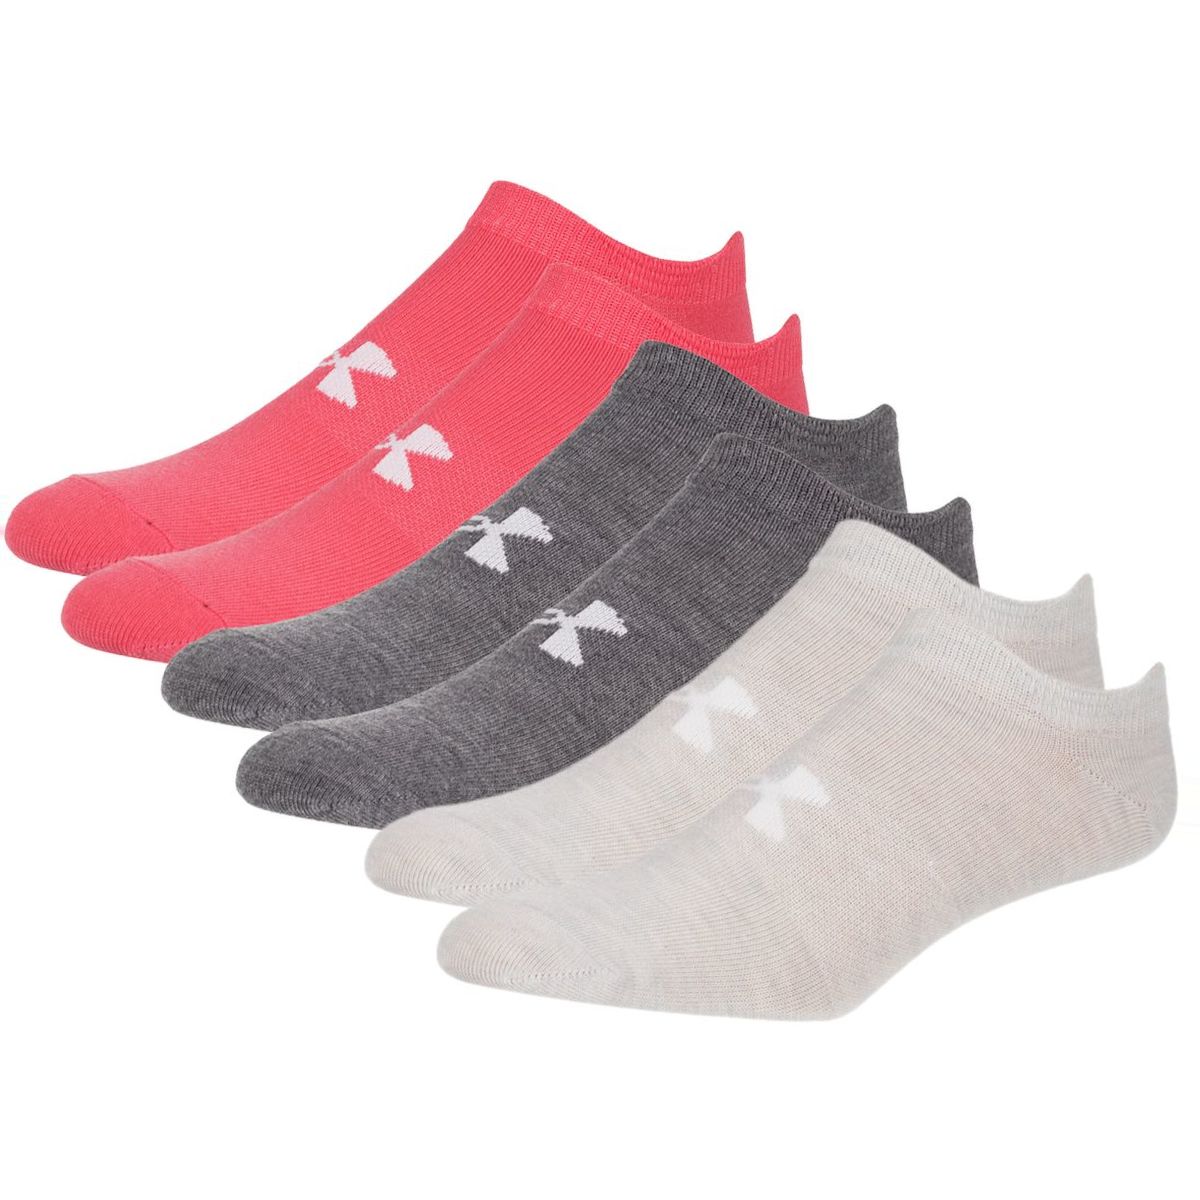 Under Armour Essential No-Show 2.0 Sock - 6-Pack - Women's